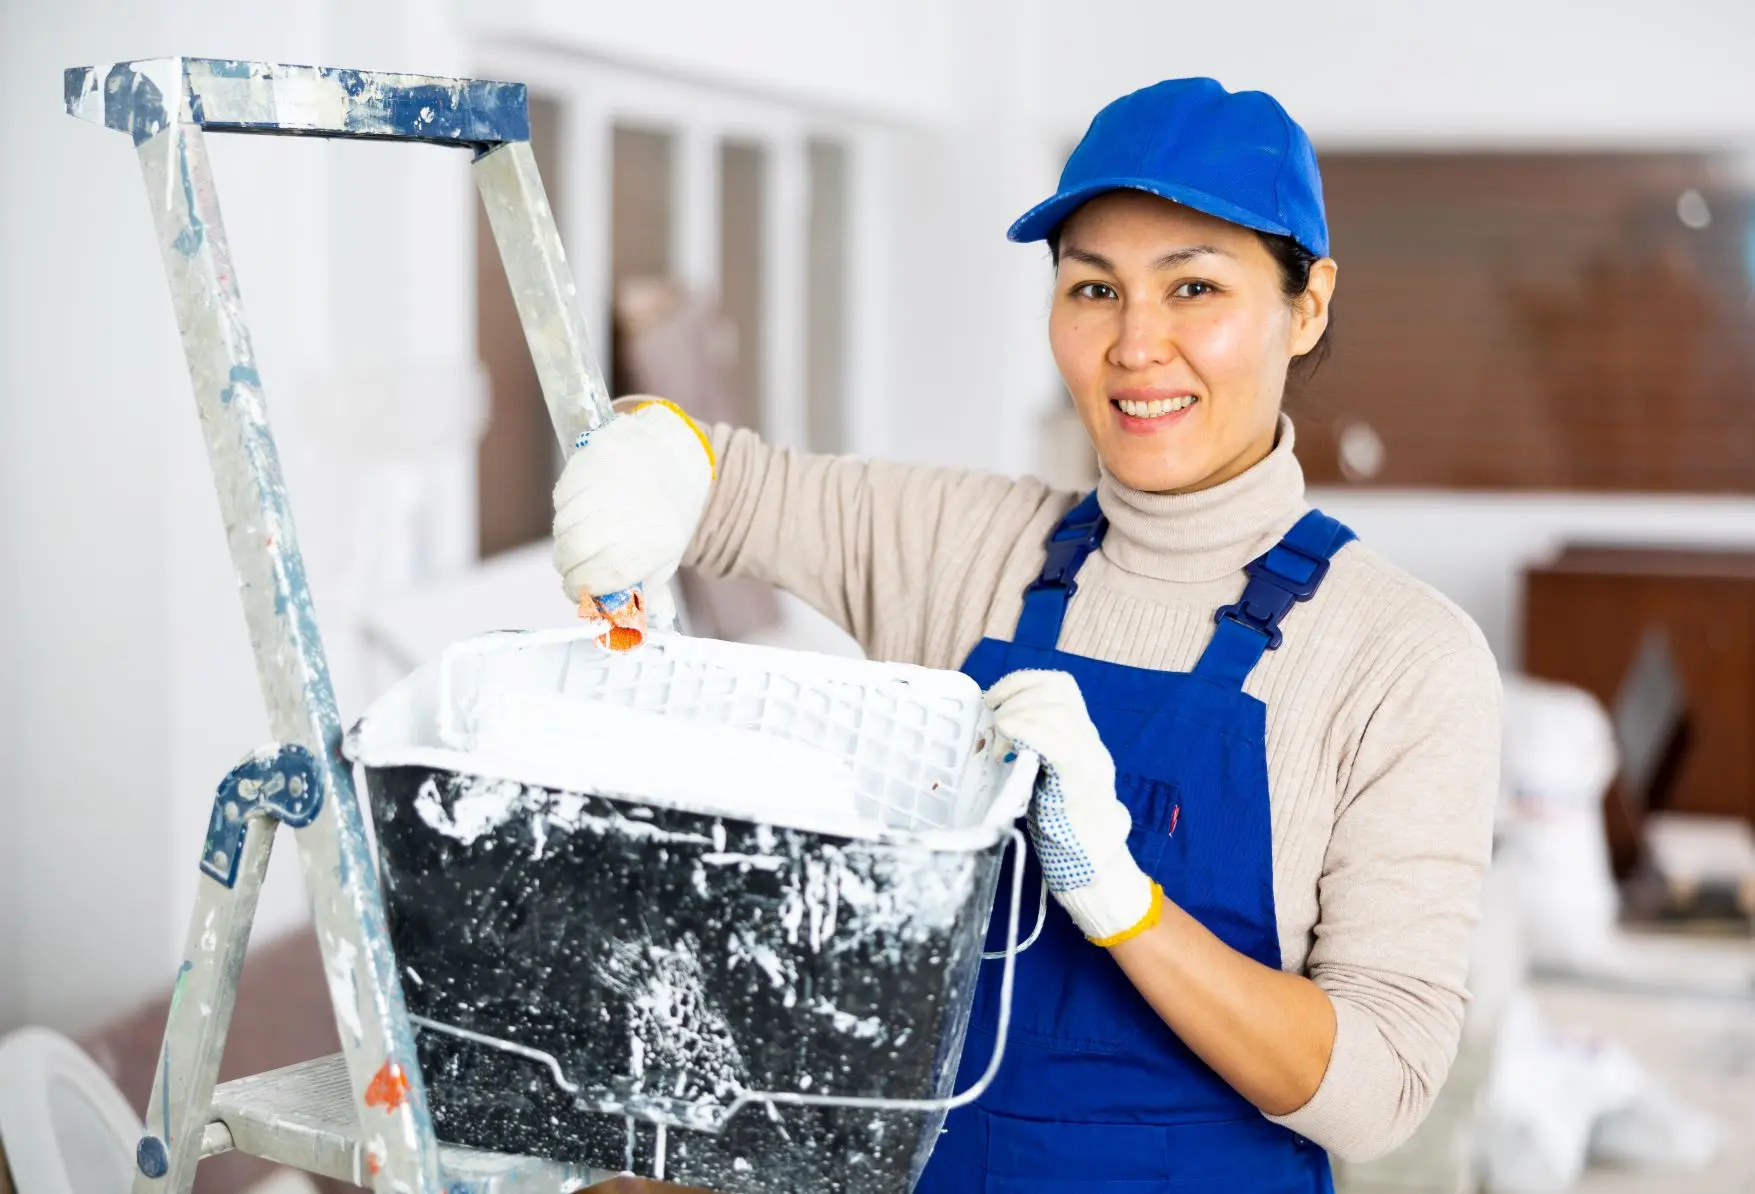 Trade painter wearing blue cap and overalls painting community building interior